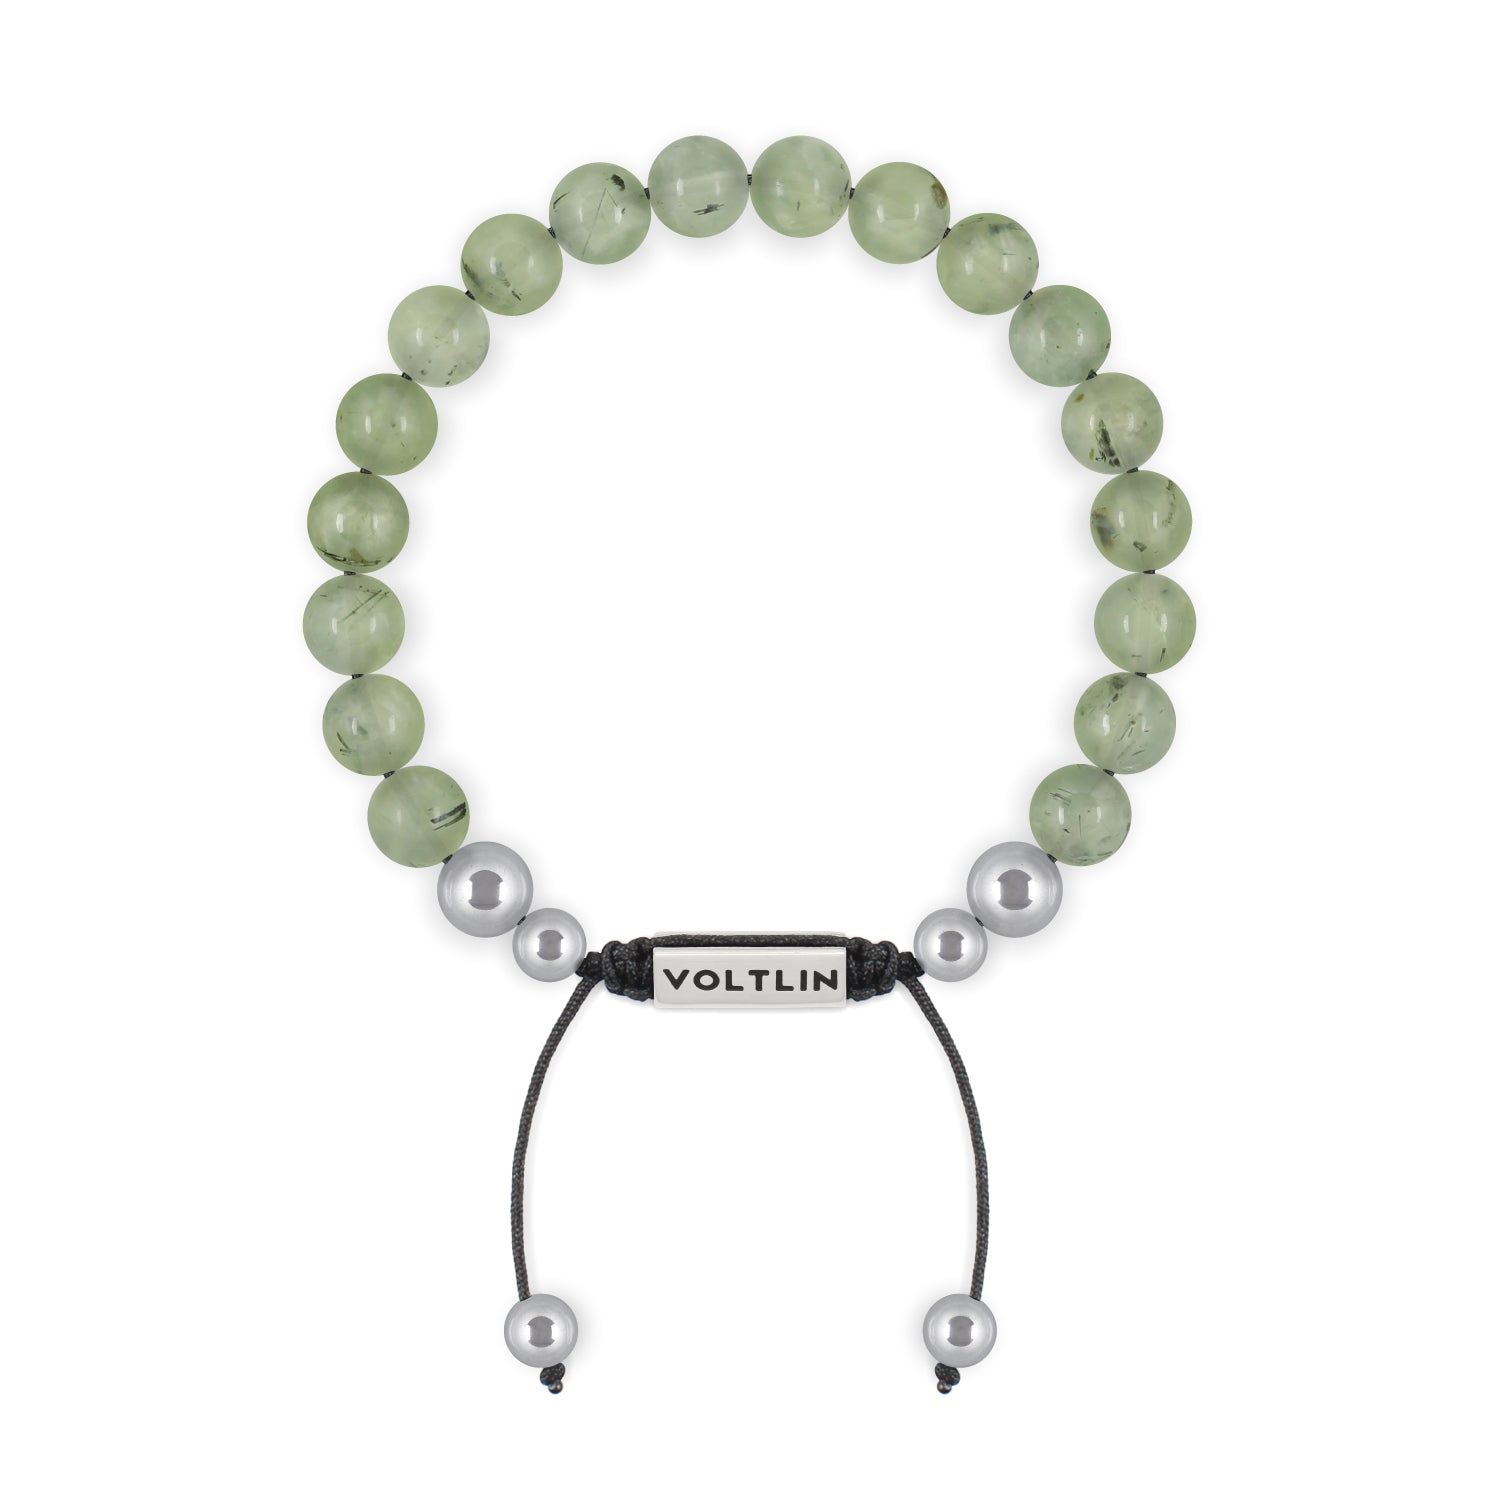 Front view of an 8mm Prehnite beaded shamballa bracelet with silver stainless steel logo bead made by Voltlin